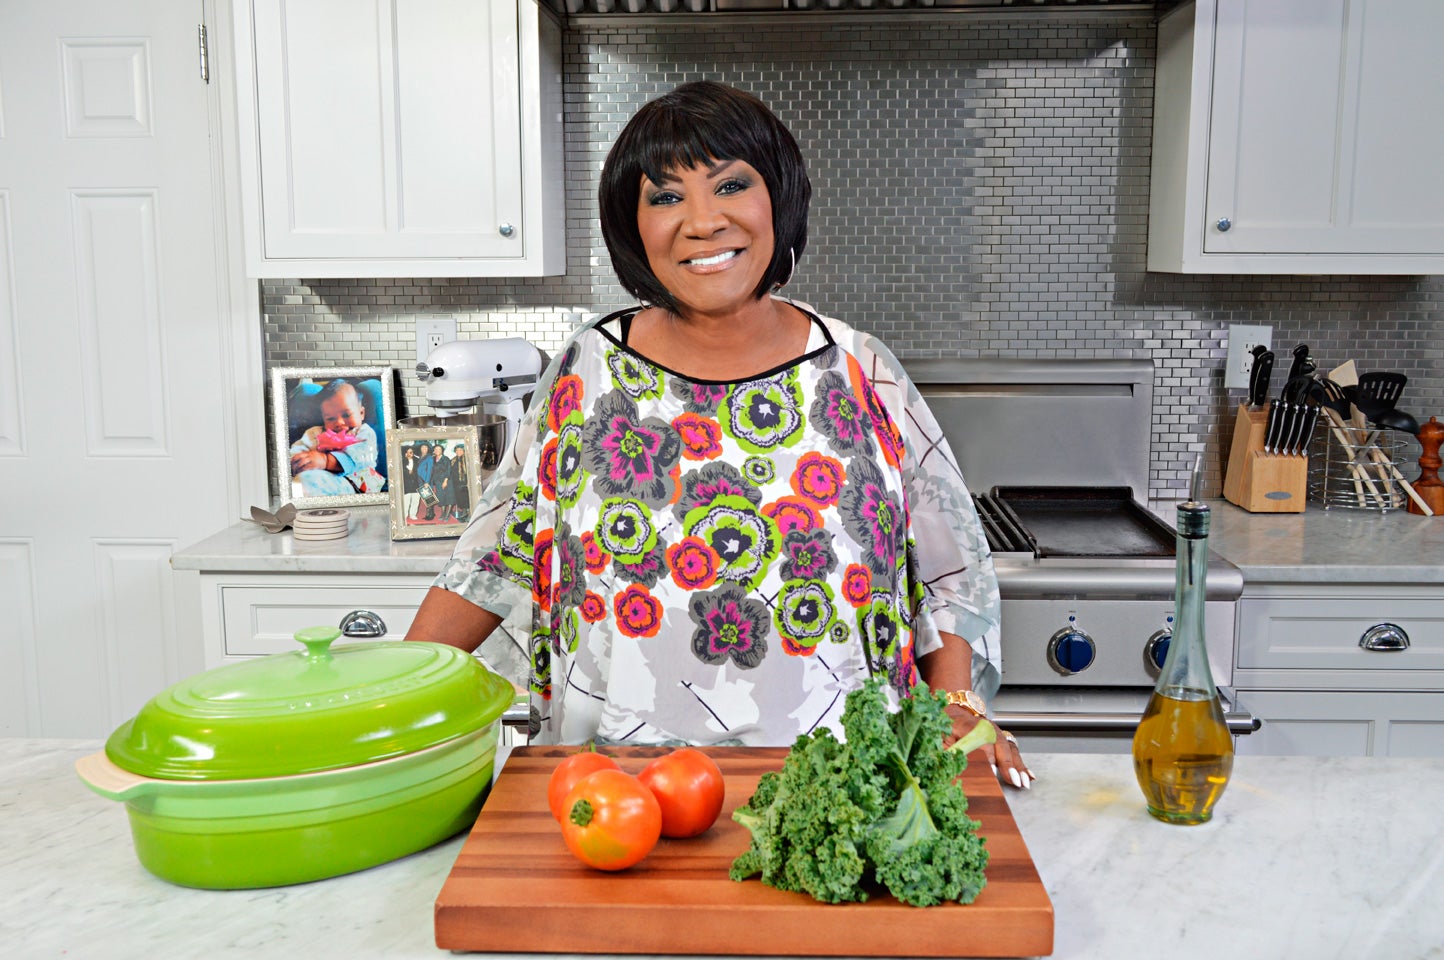 Some Like it Hot! Patti LaBelle Serves Up Soul Food with Her Signature Spice